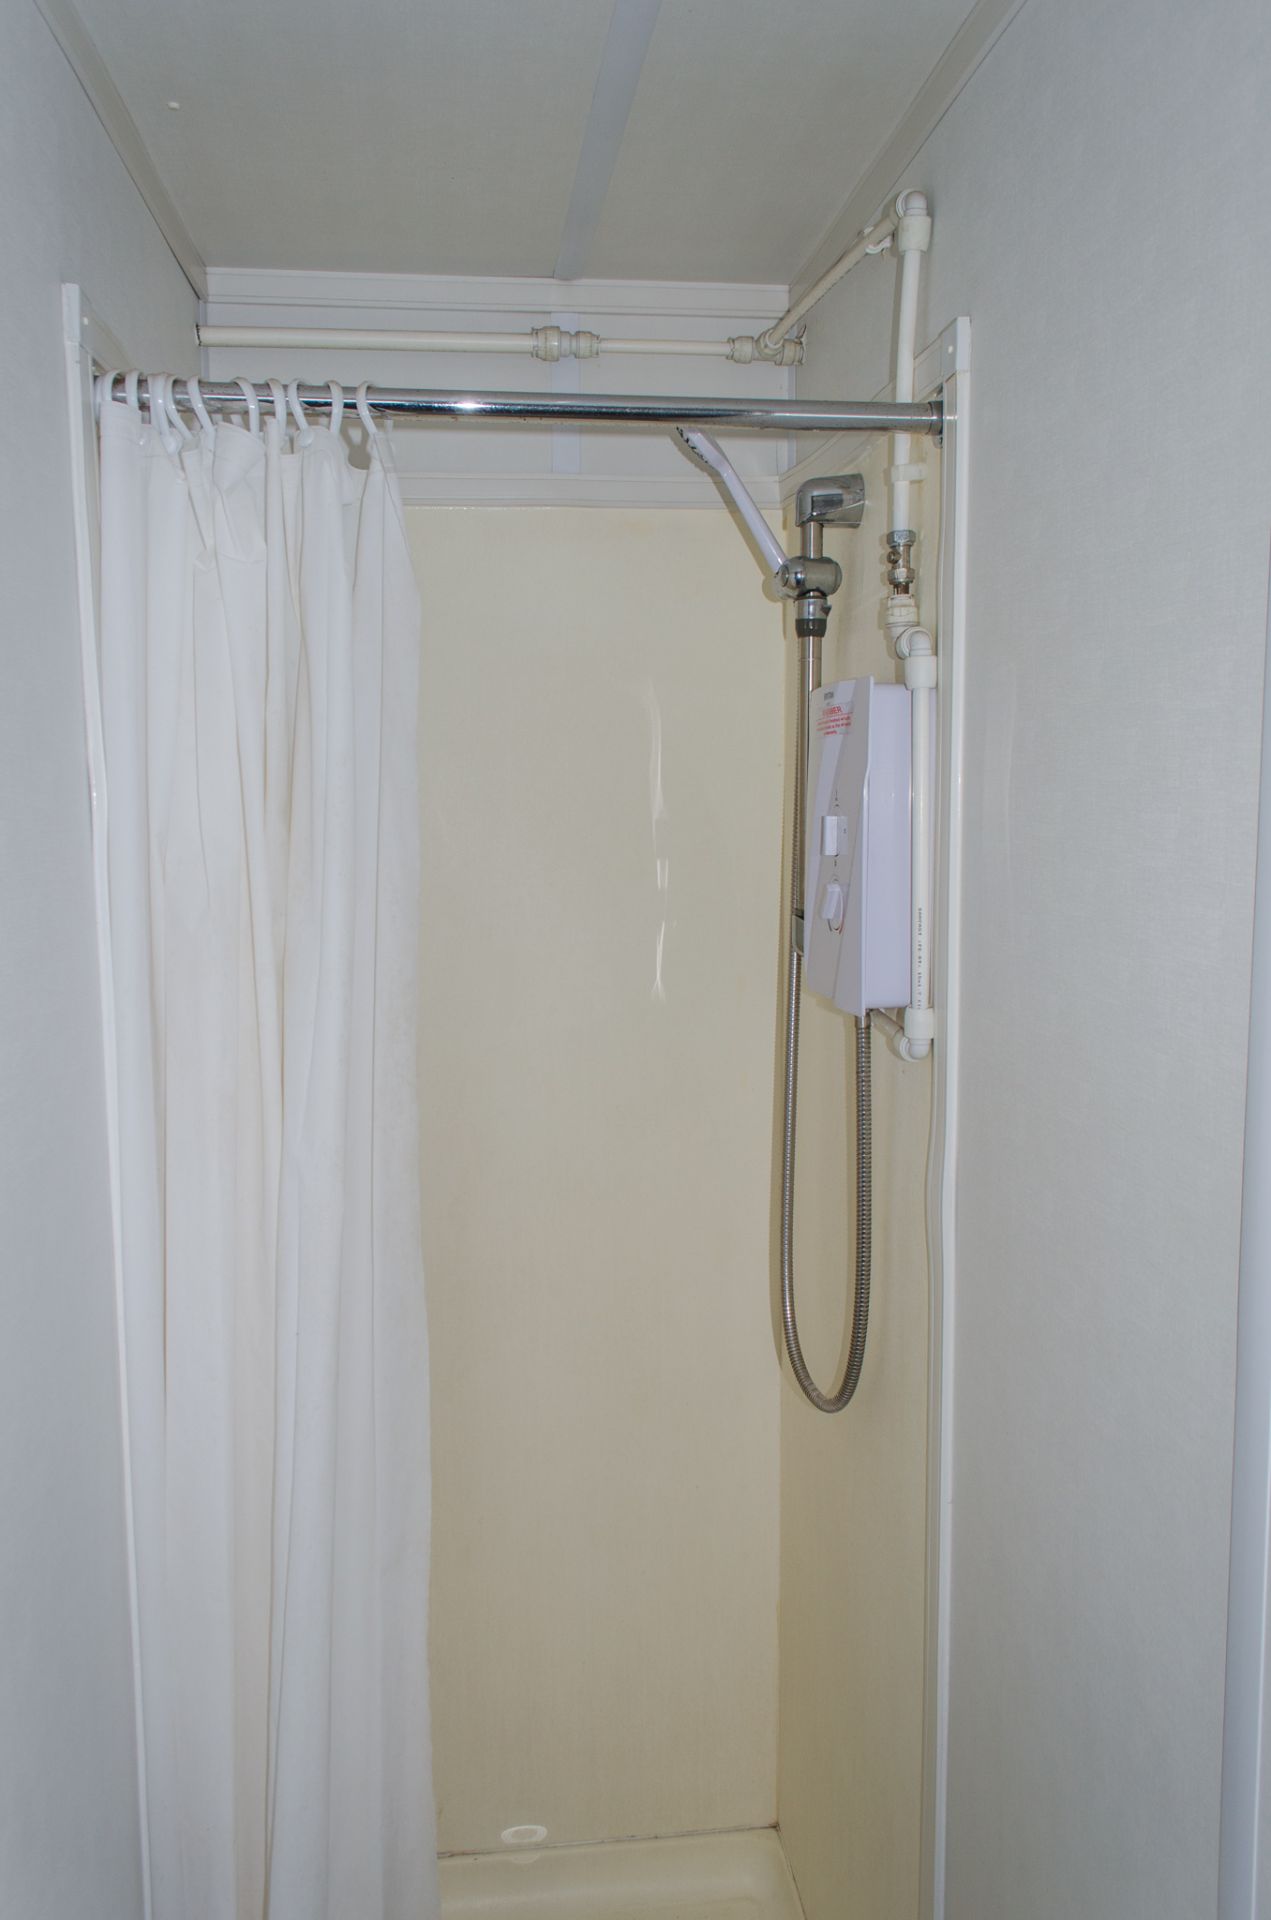 32 ft x 10 ft steel jack leg shower site unit Comprising of 8 - showers & changing area BBA1684 - Image 13 of 14